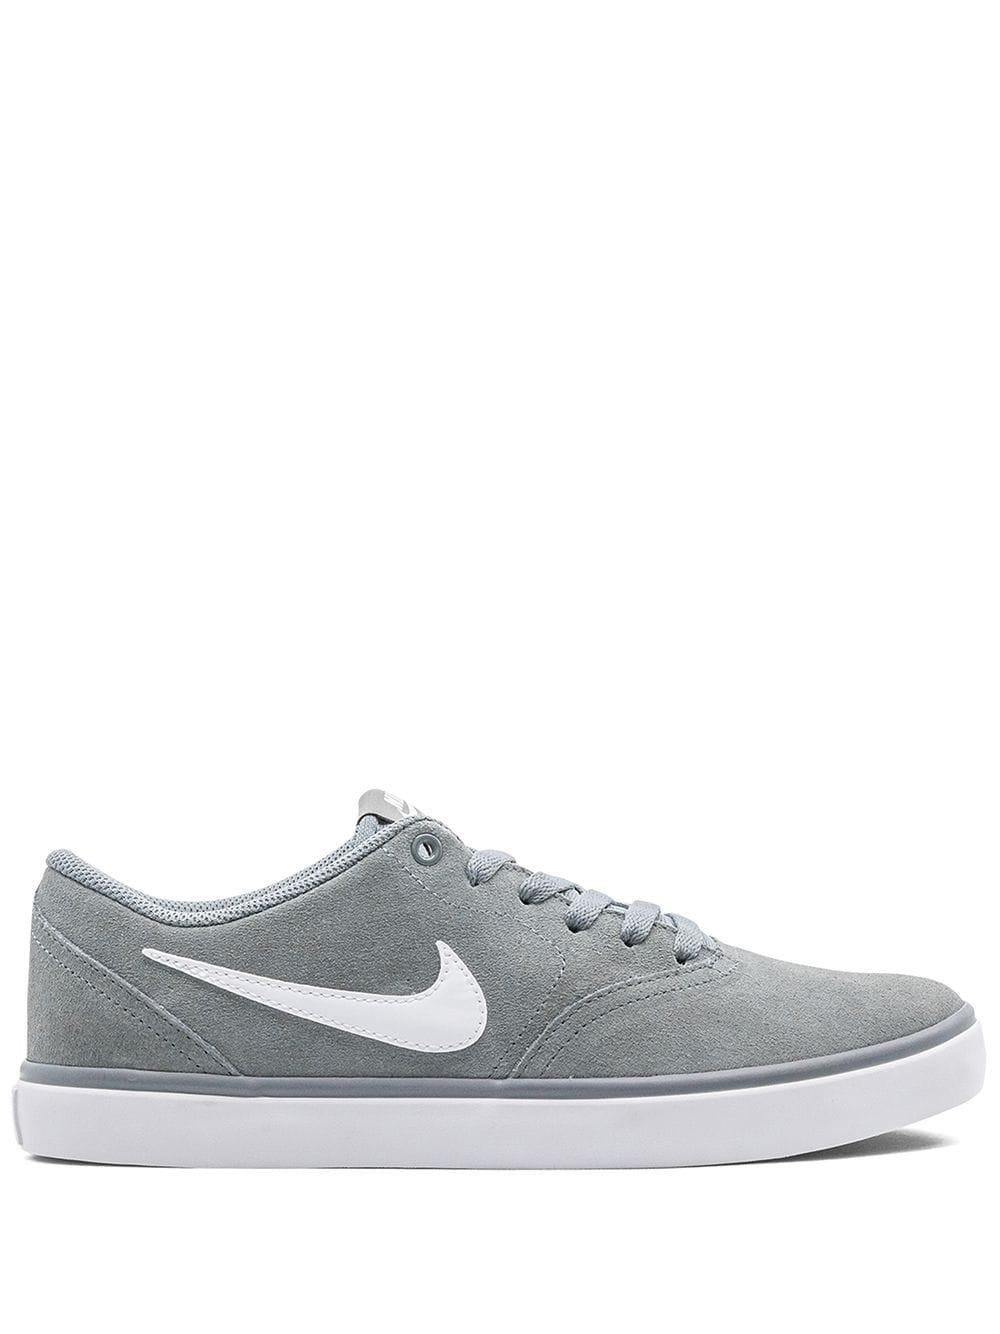 Nike Sb Check Solar Sneakers in Cool Grey/White (Gray) for Men | Lyst